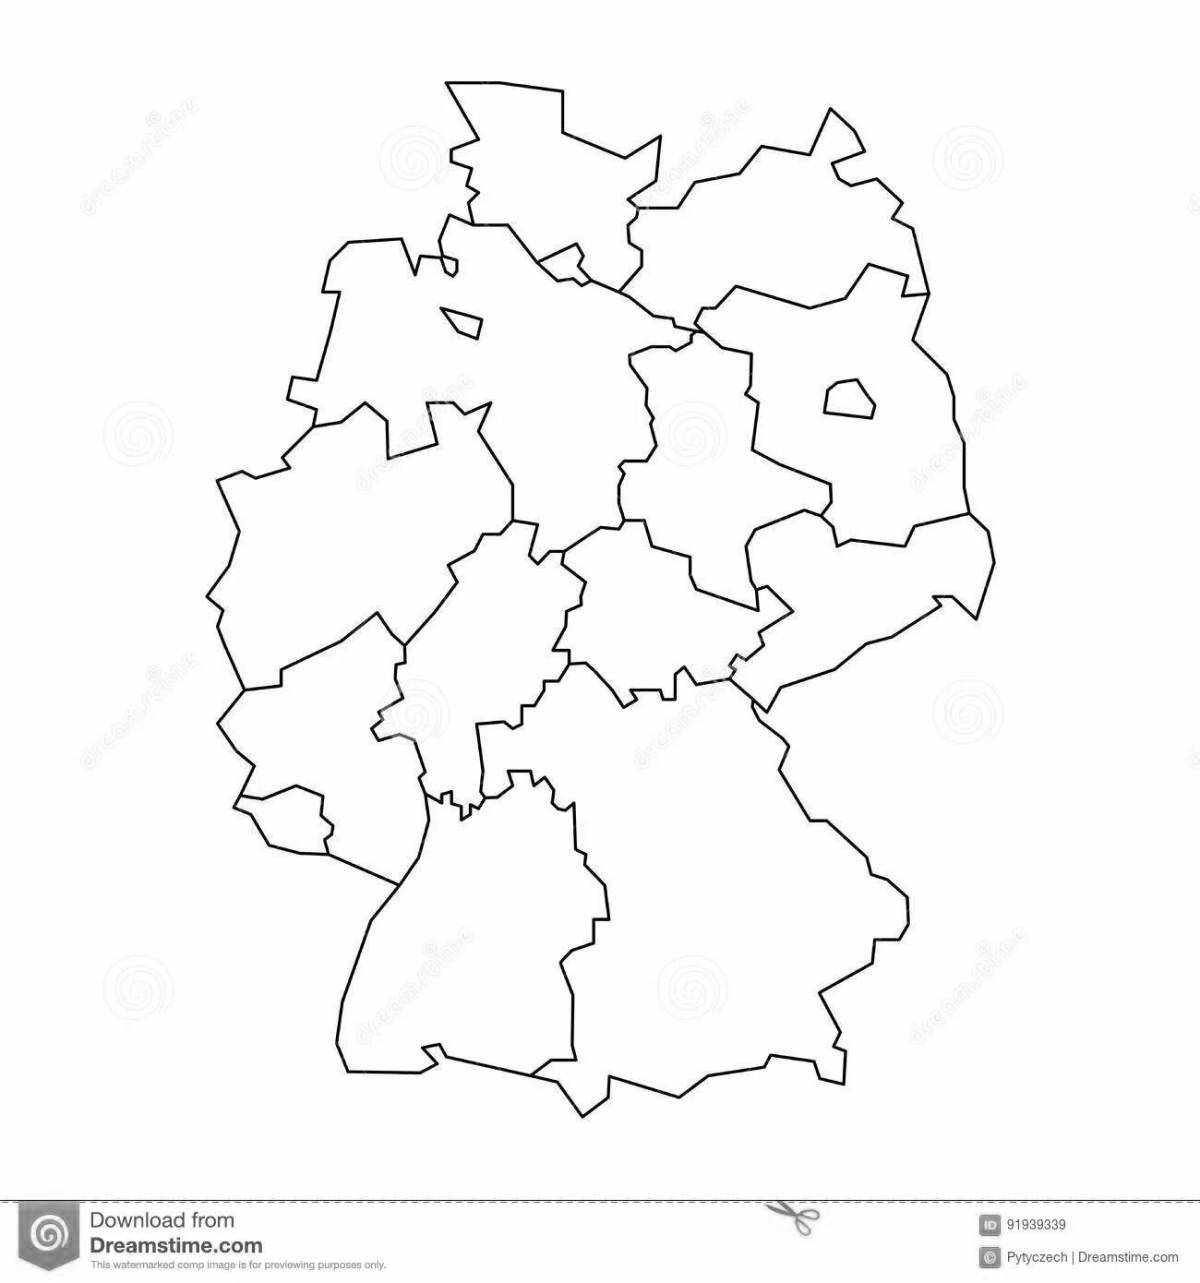 Charming map of germany coloring book